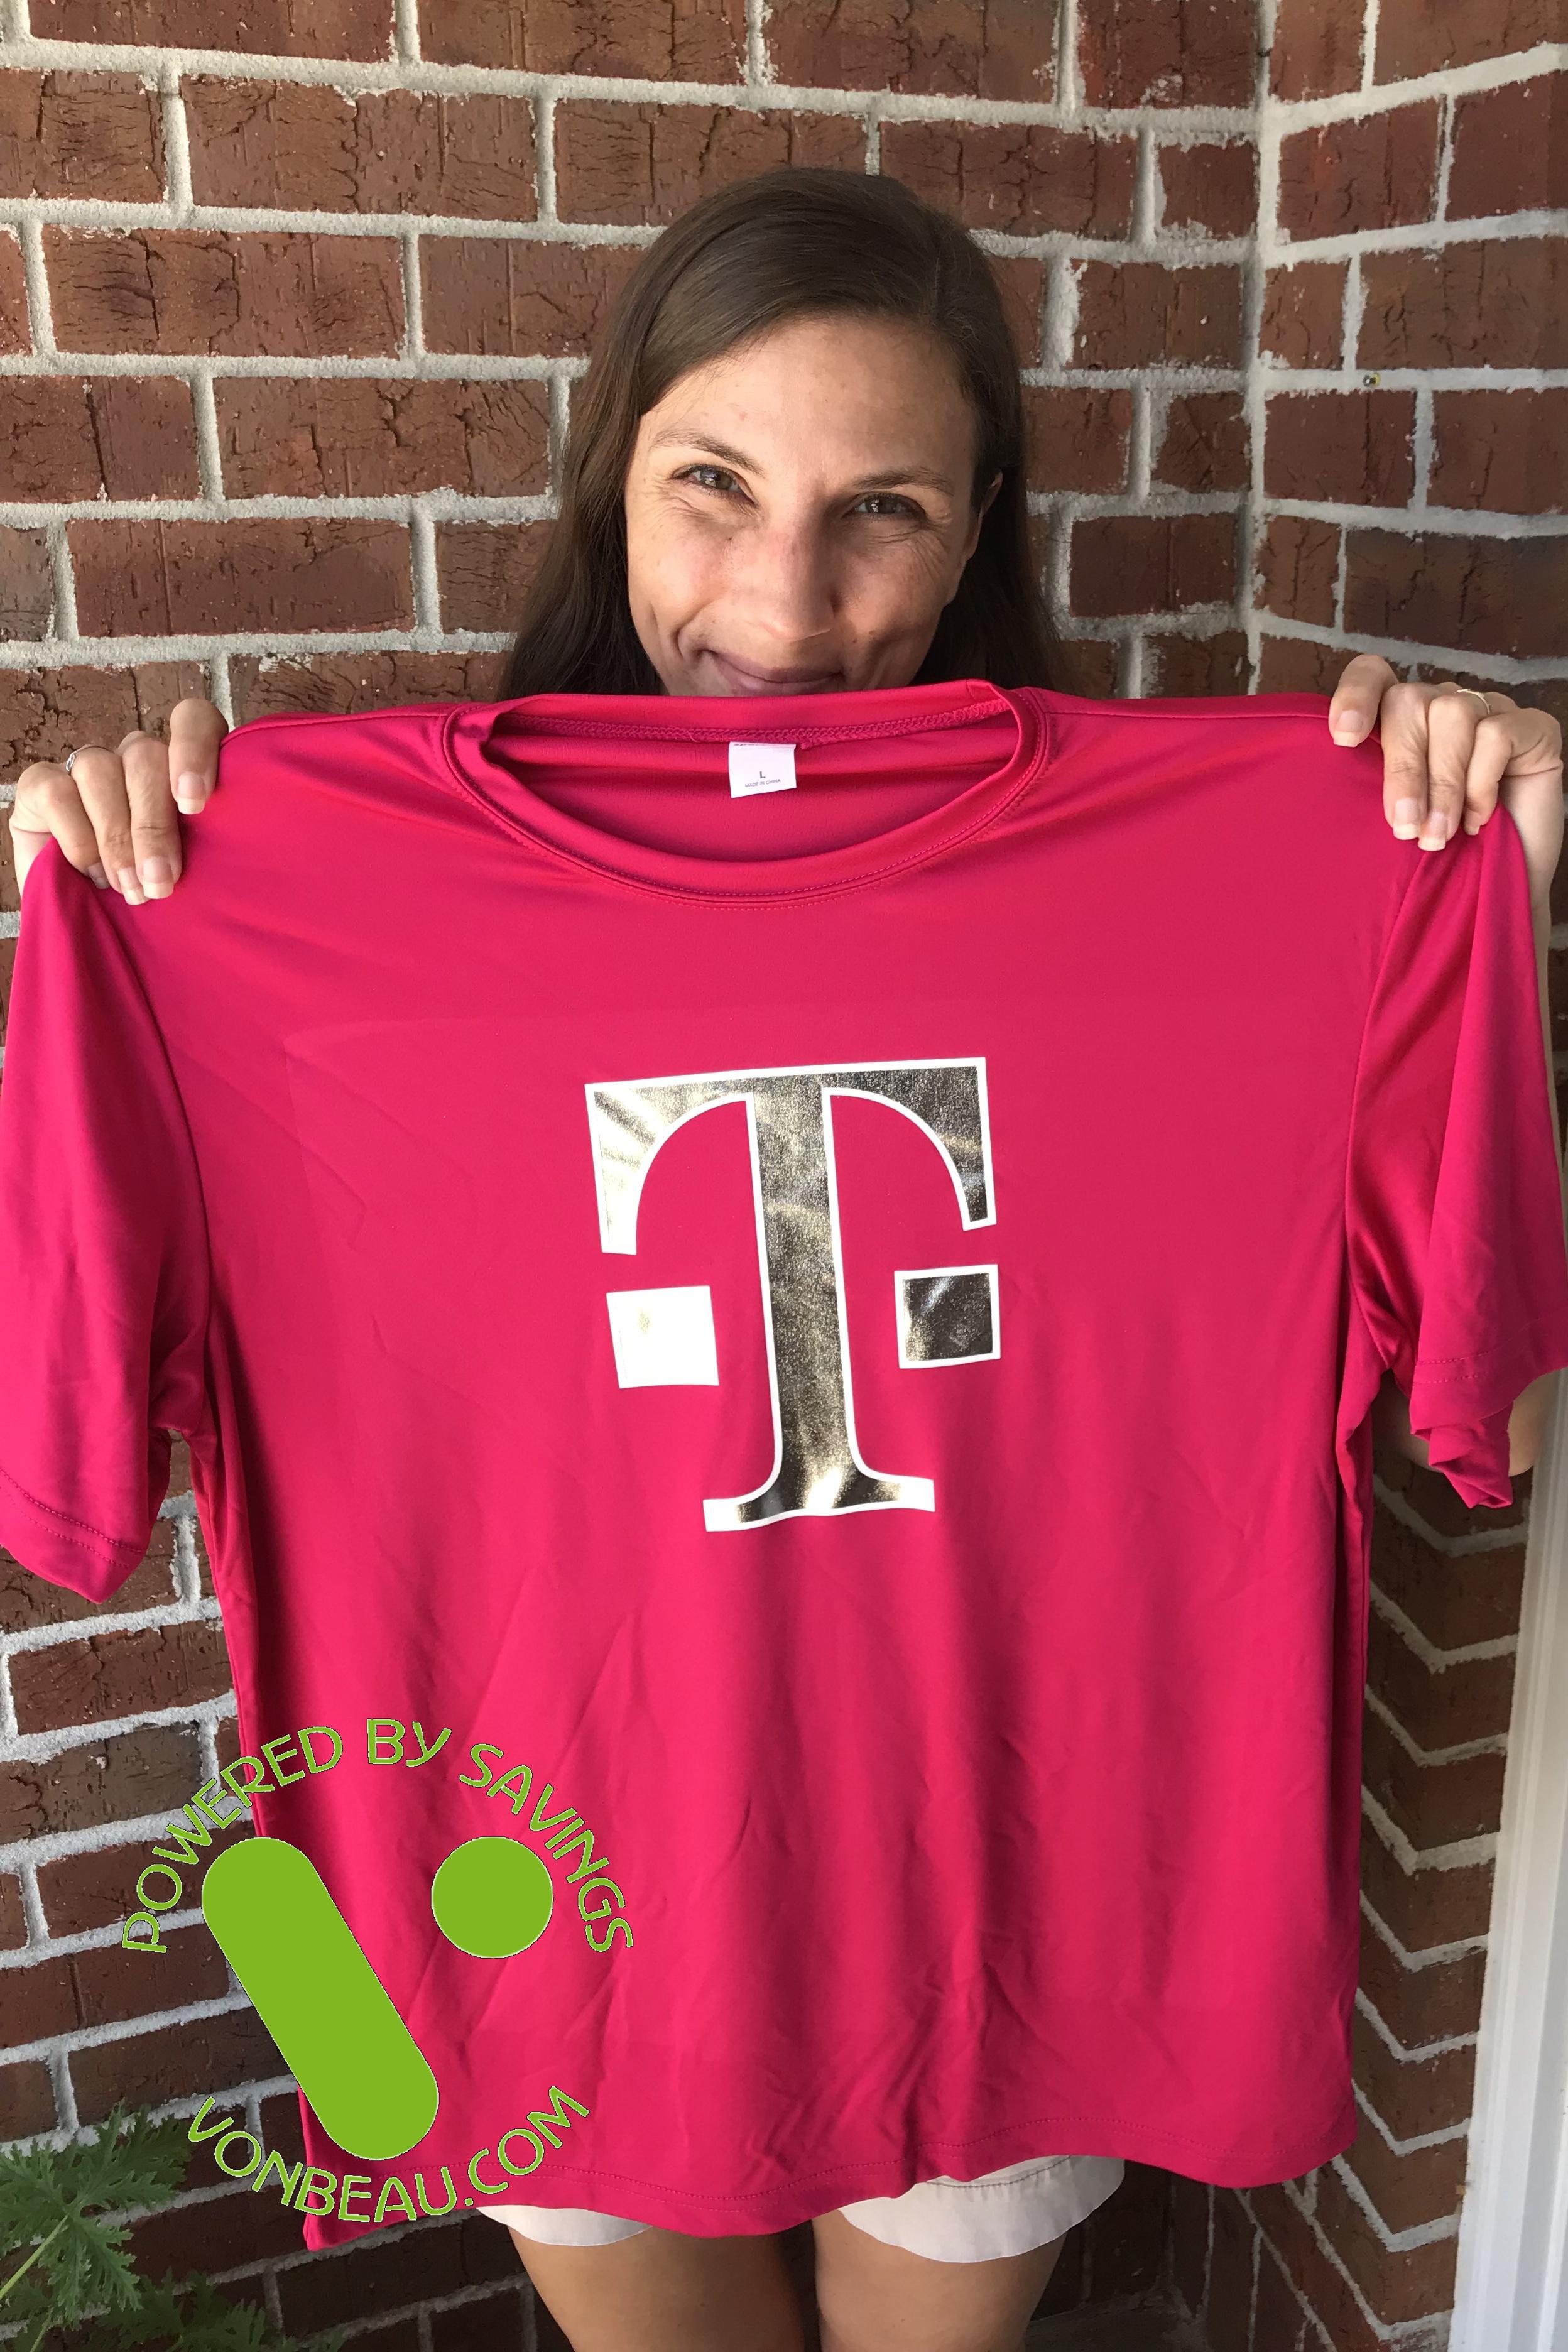 Free T Mobile Shirt With Free Shipping Twitter Required